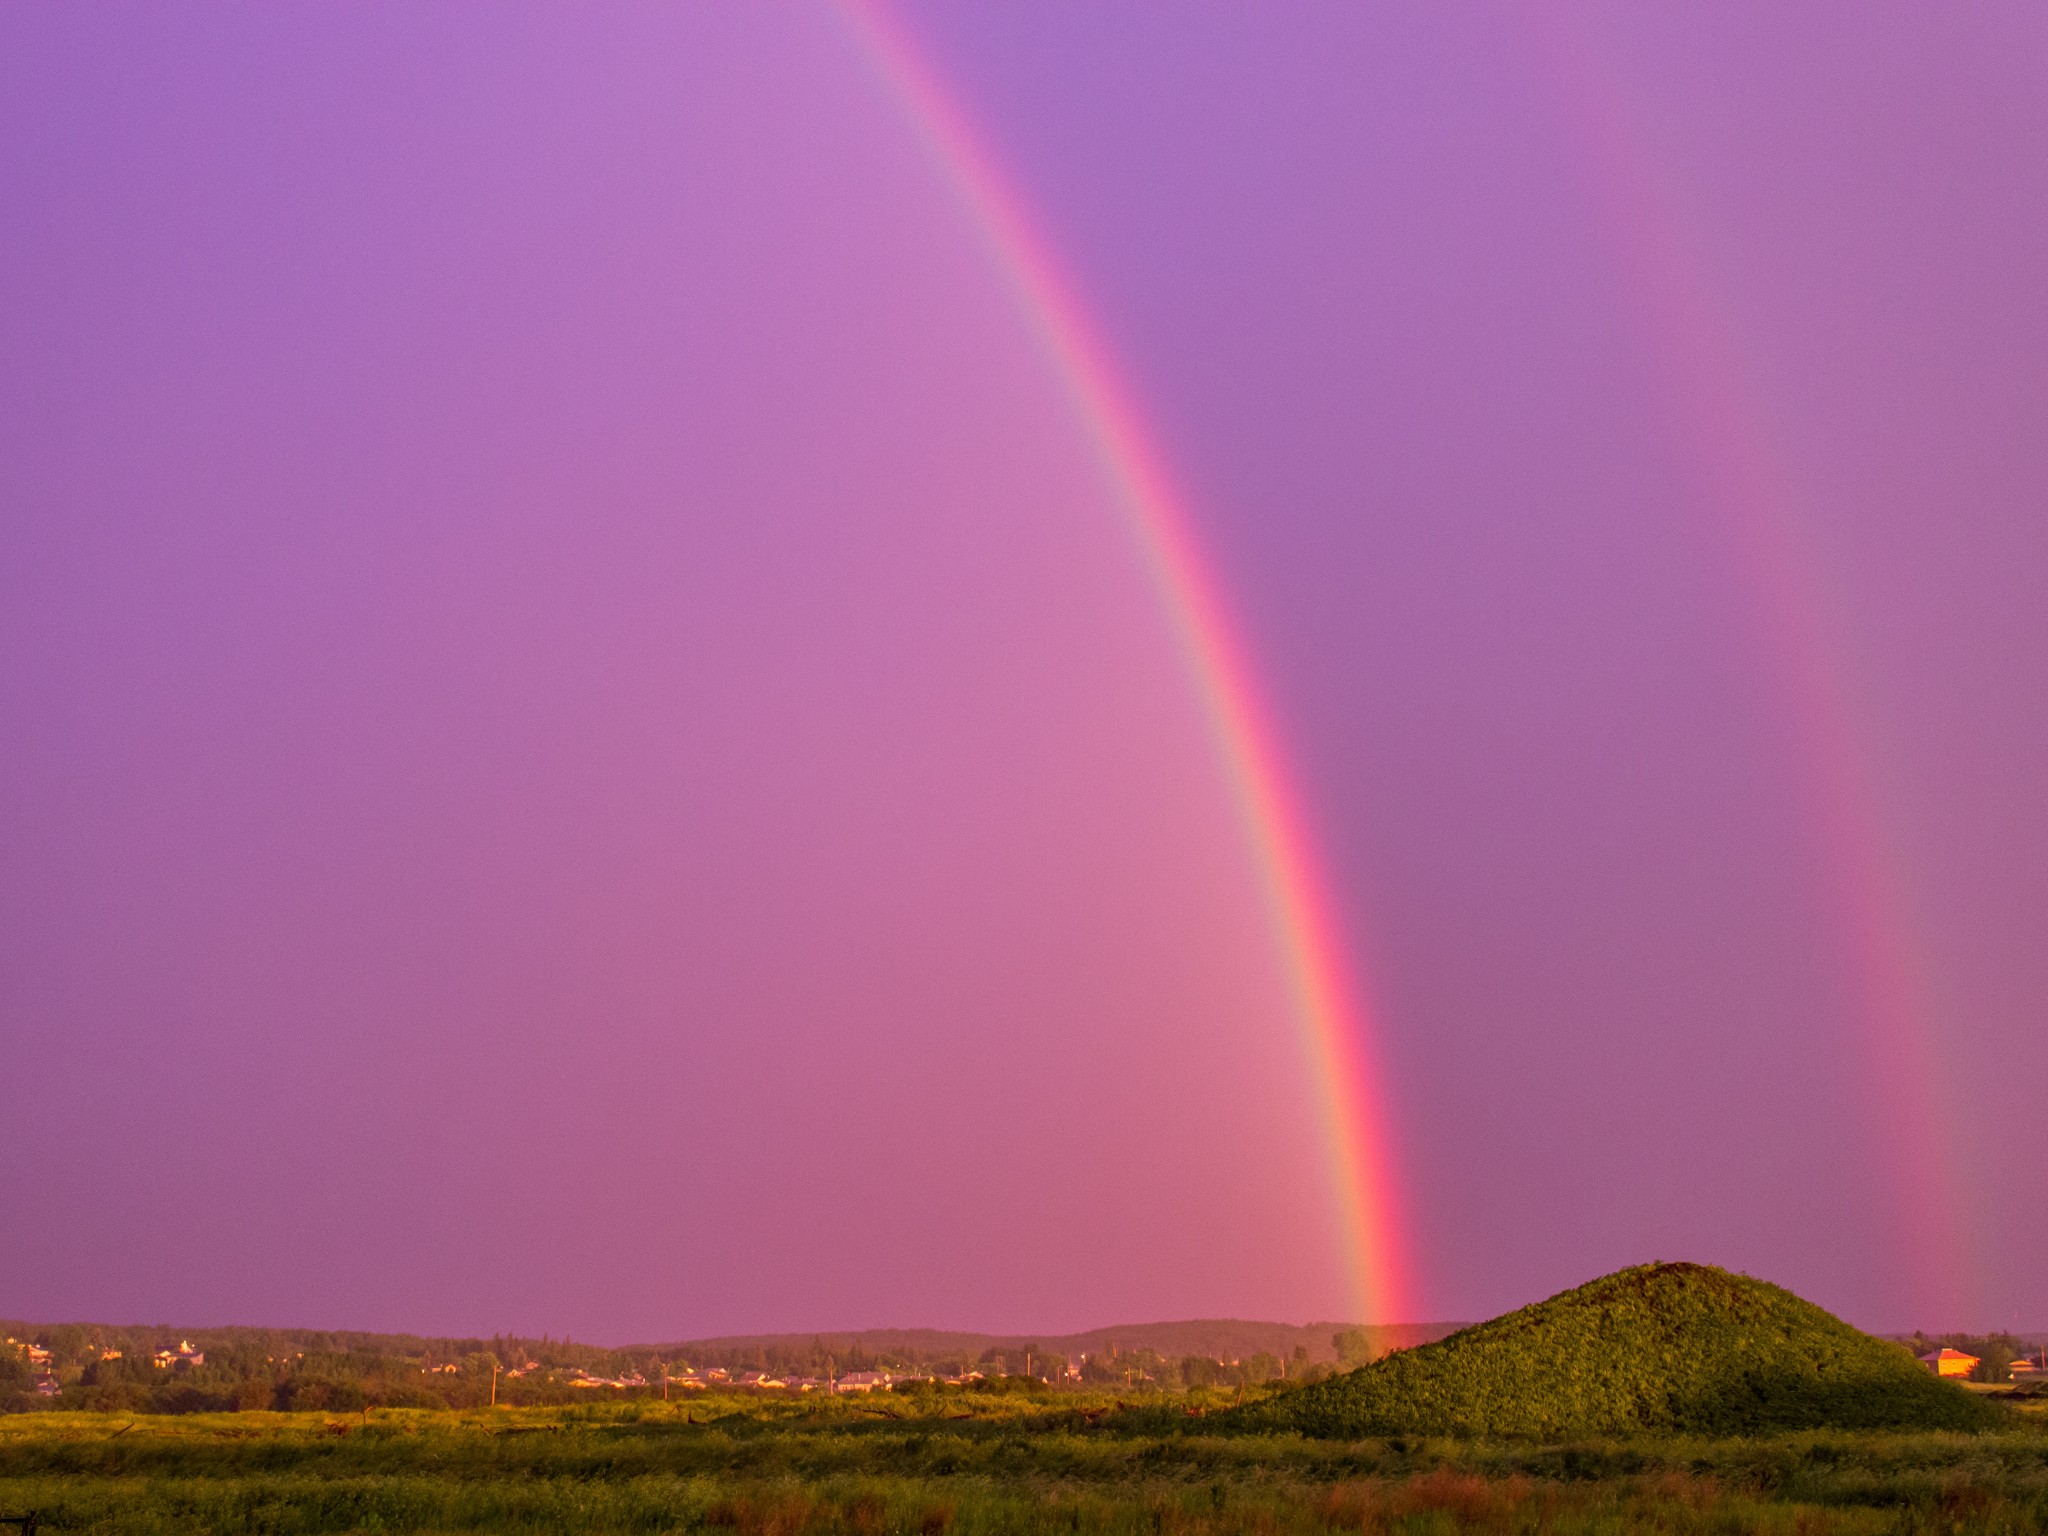 A double rainbow over a country town | Street Science